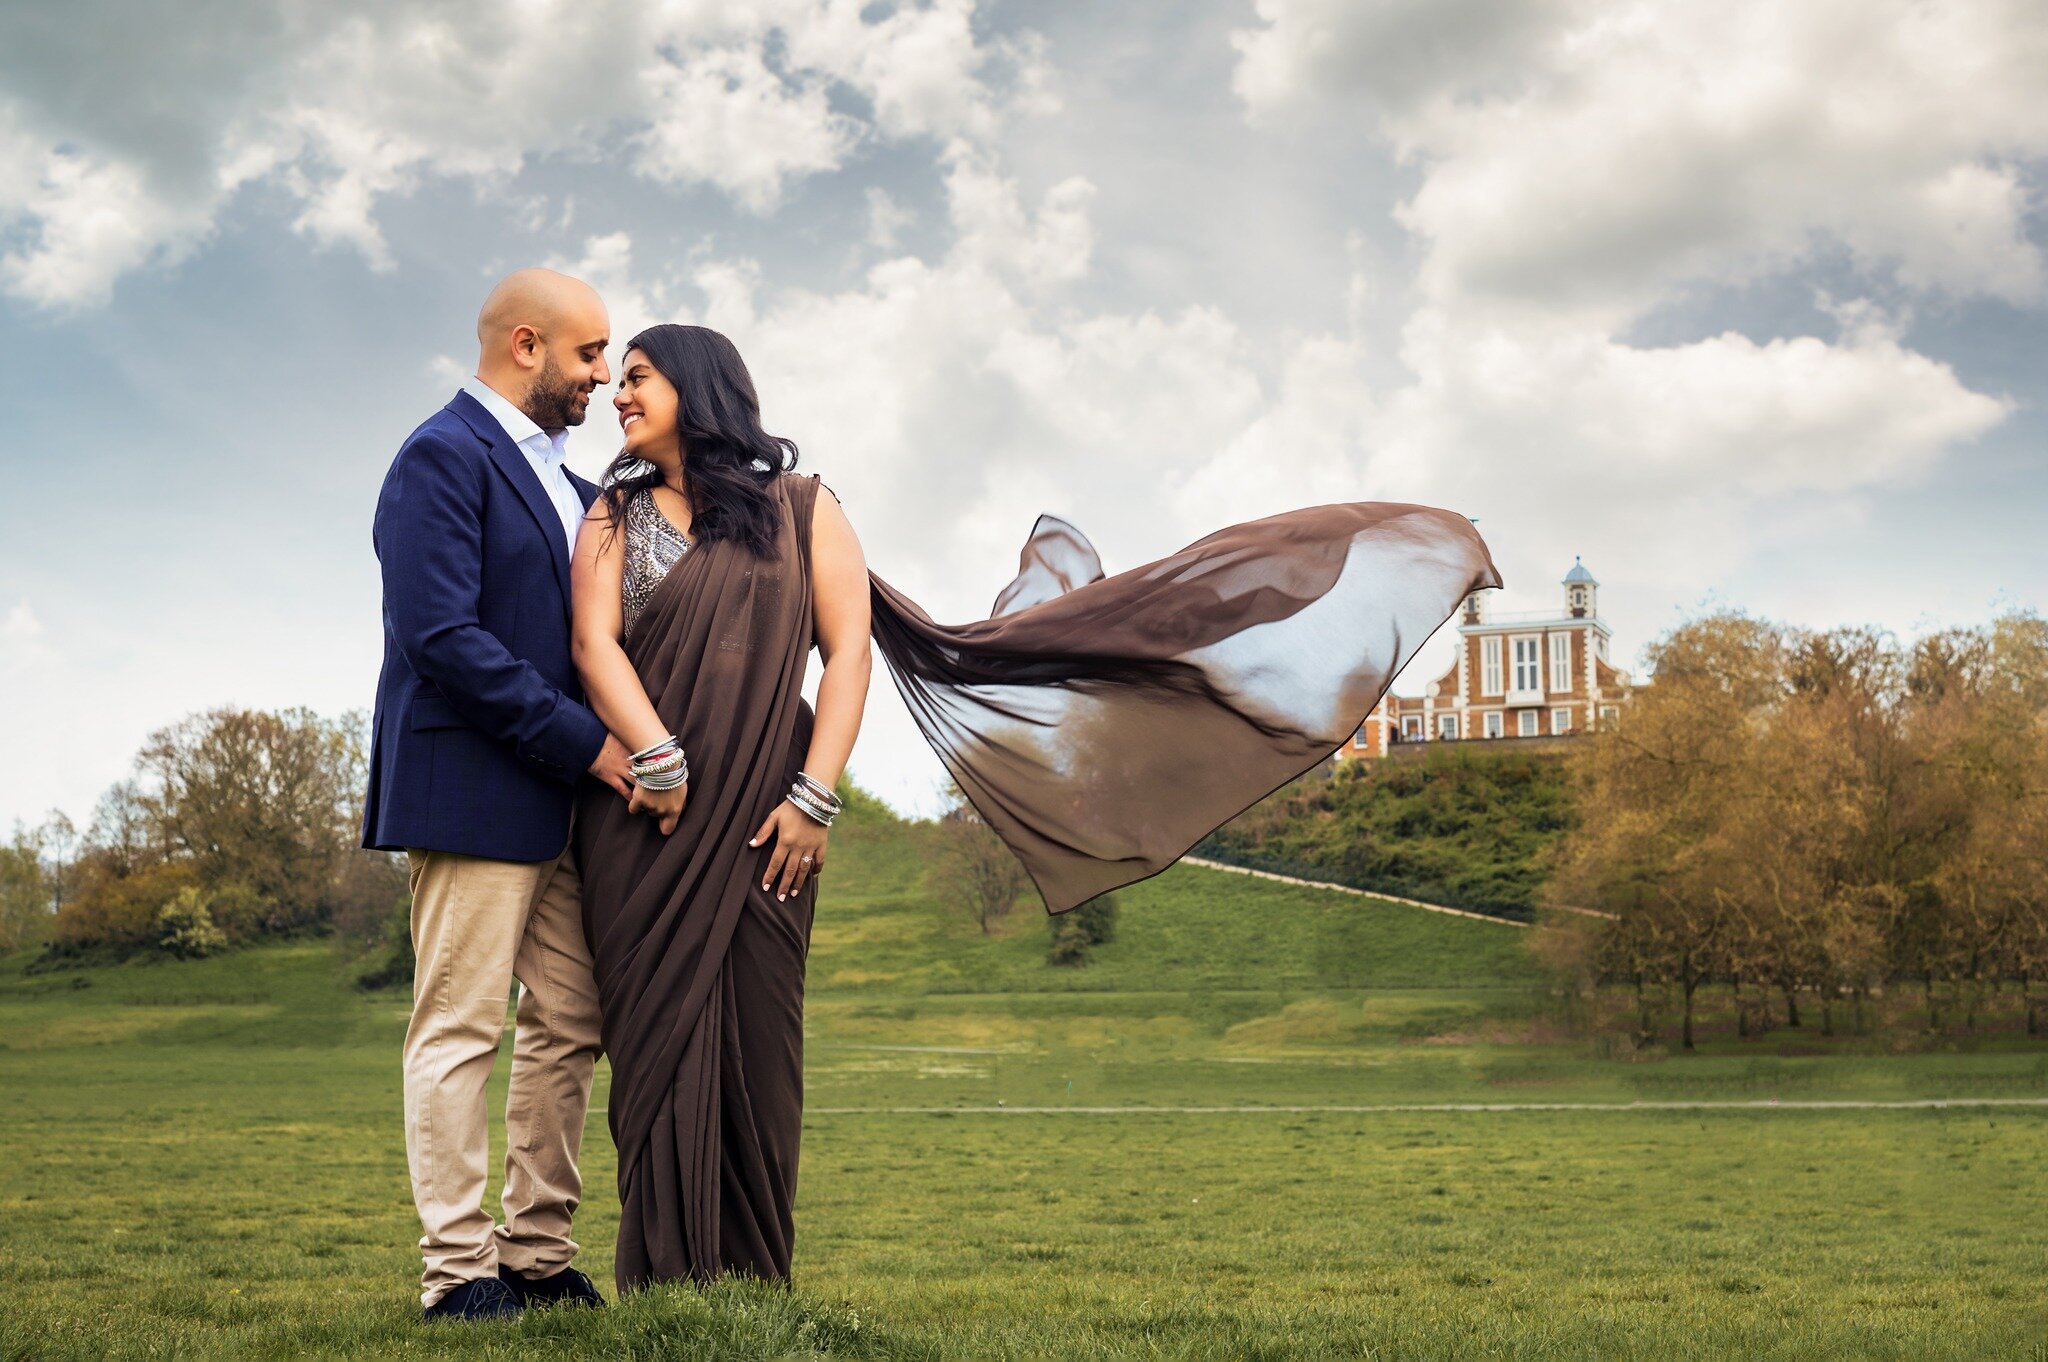 Are you looking for a Wedding Photographer? Come check us out at the Asian Wedding Show this Sunday 30th April 2023 alongside other specialist suppliers! Follow the link on our story to get your free tickets!

Asian Wedding Show
Date: Sunday 30th Apr